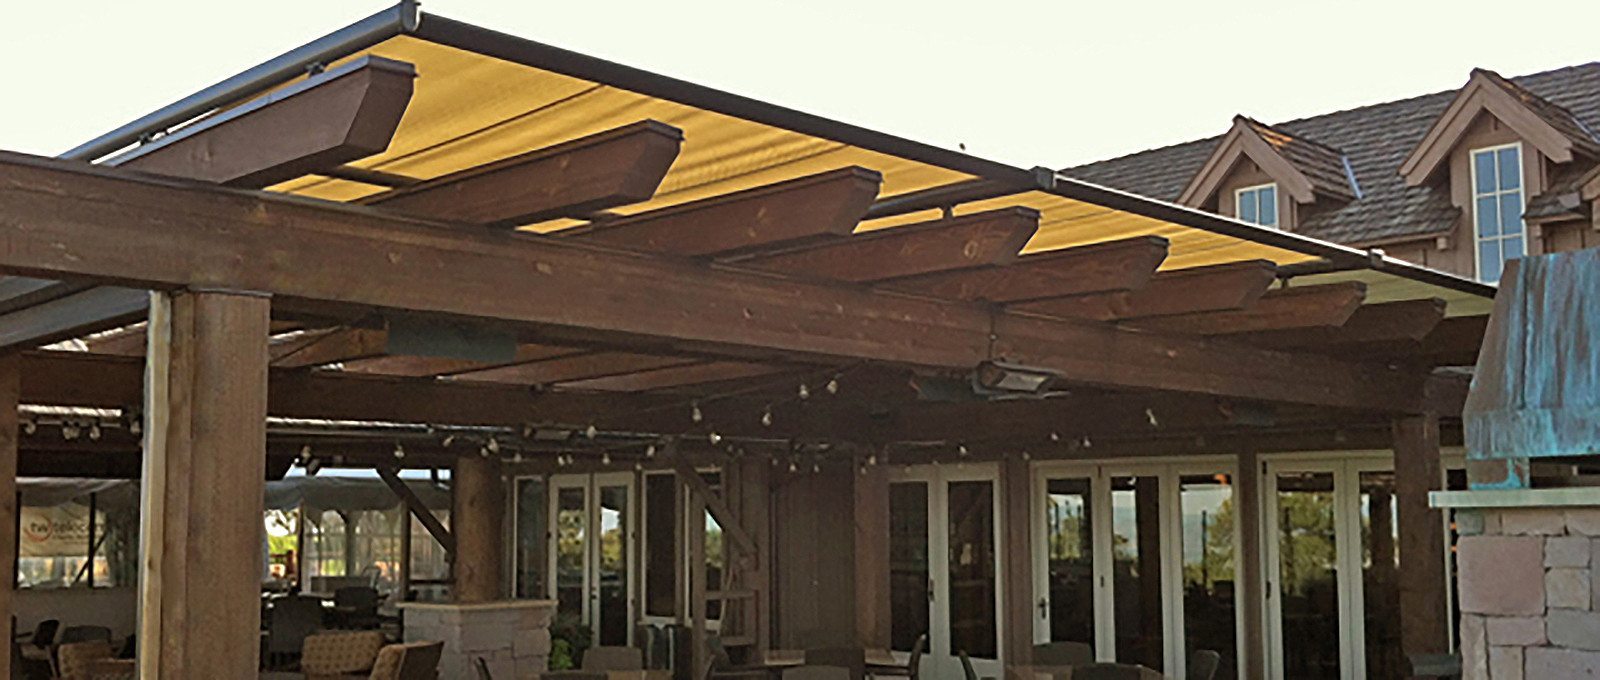 Pinnacle structure awning over pergola